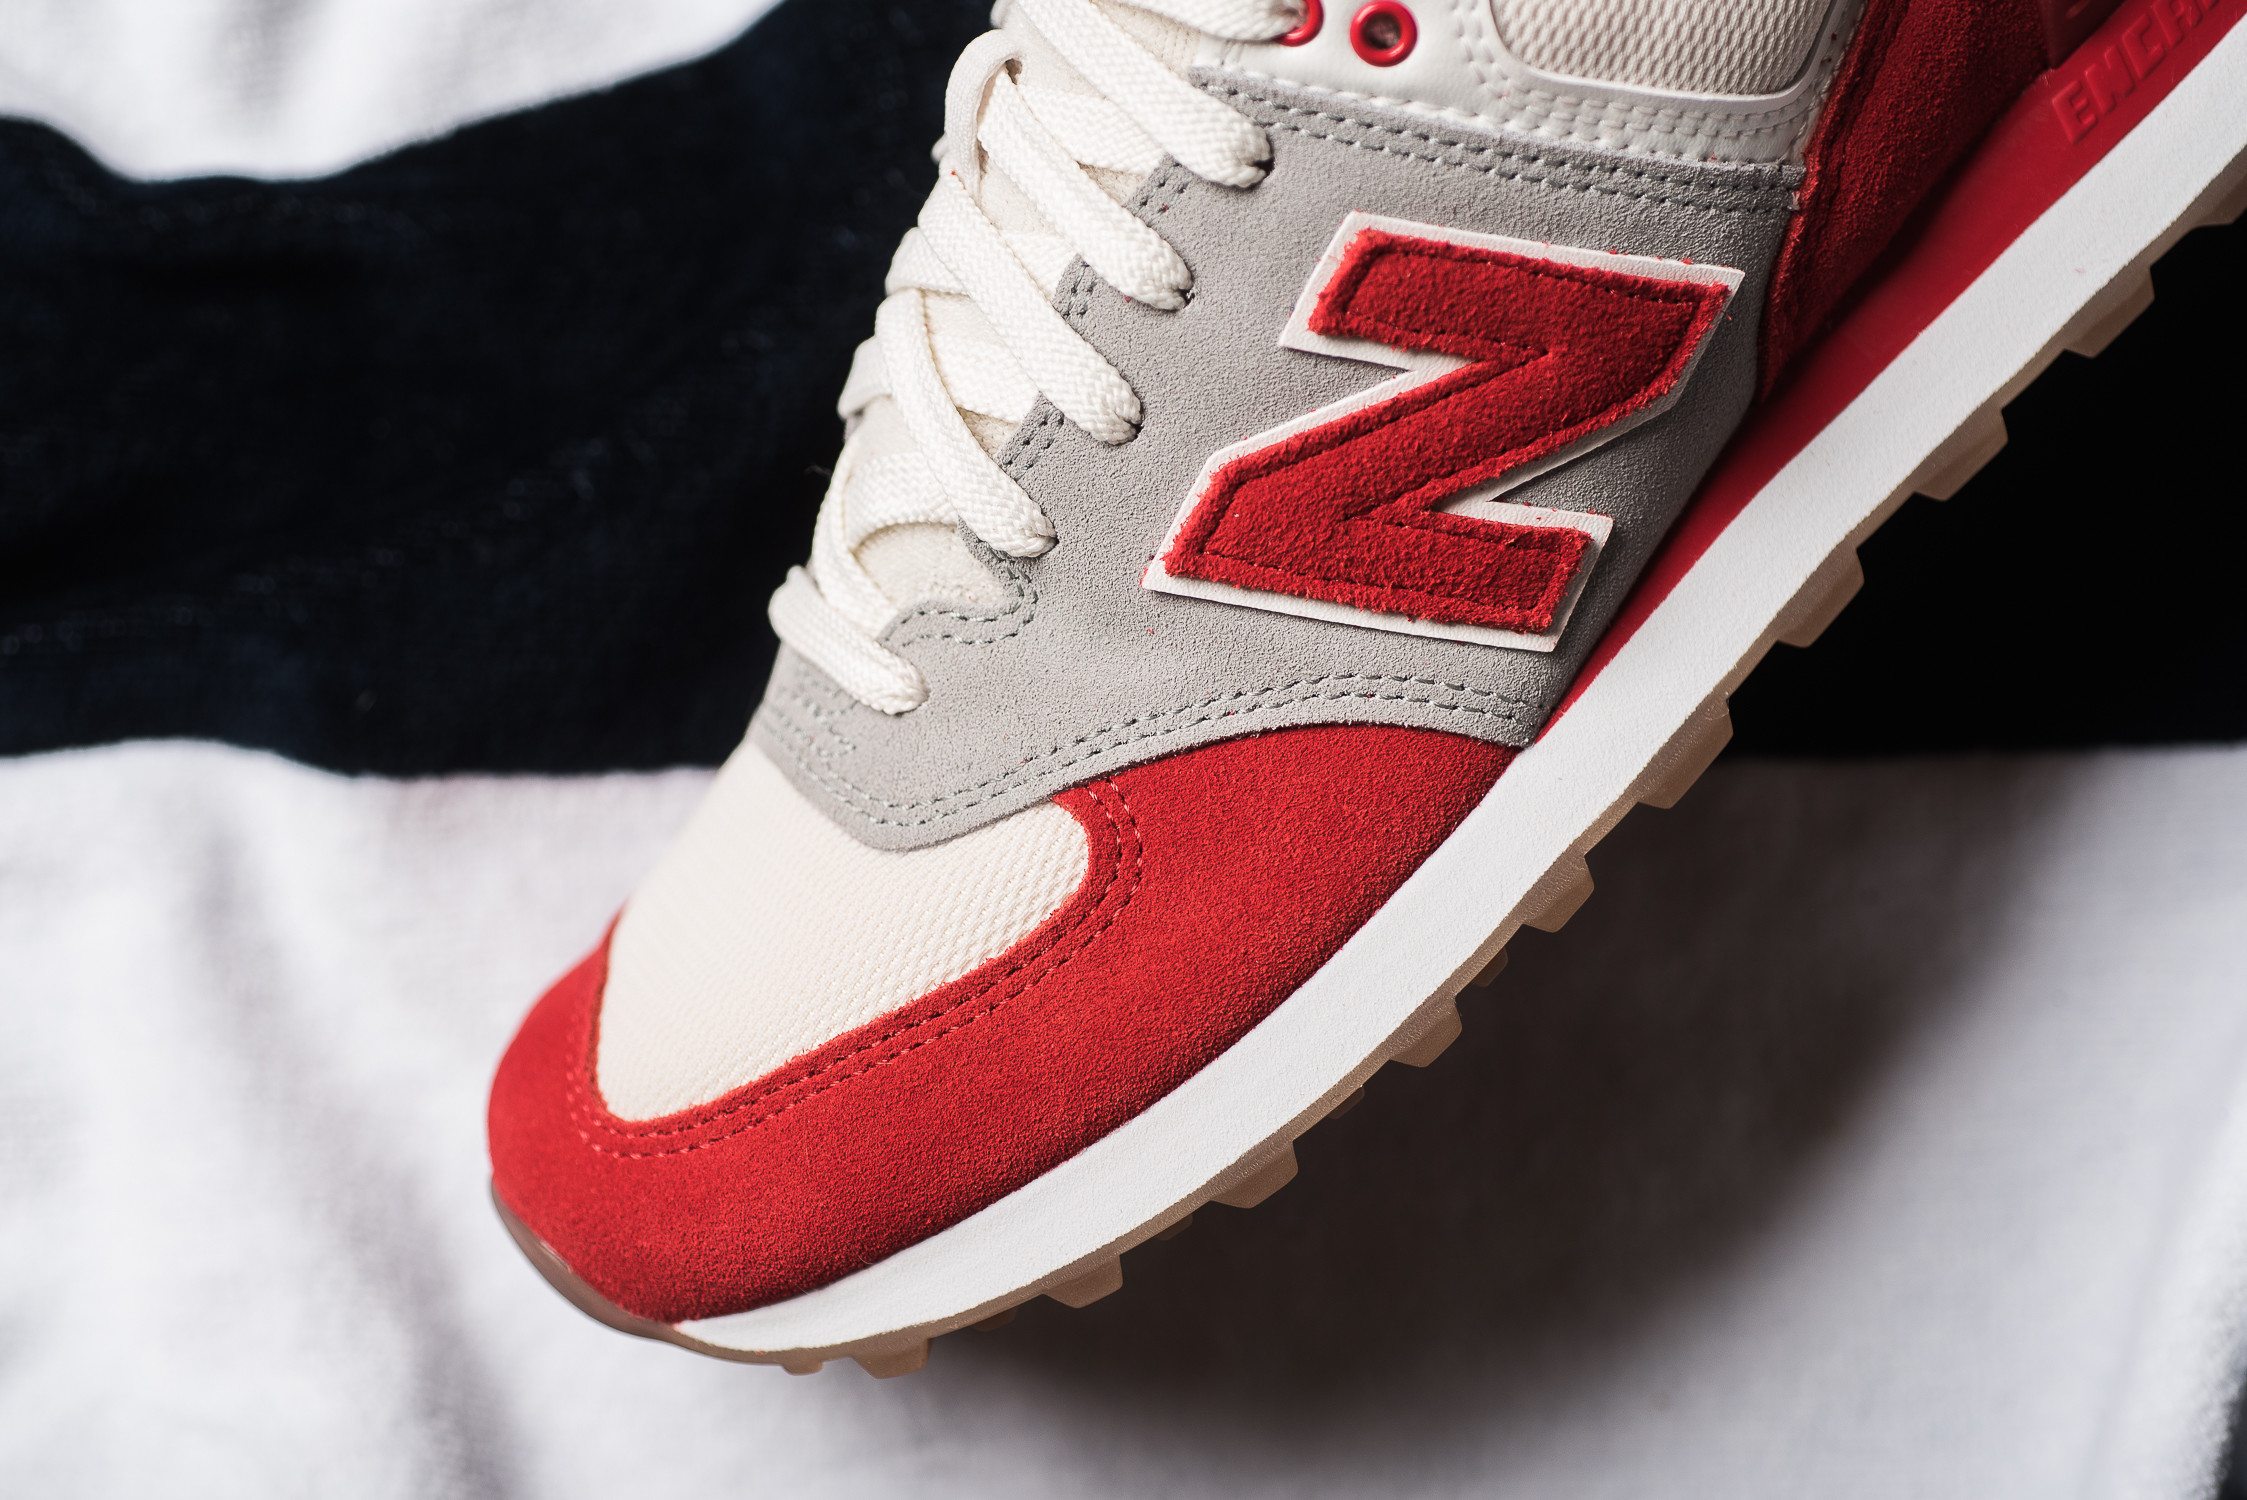 New Balance 574 "Terry Cloth" Pack